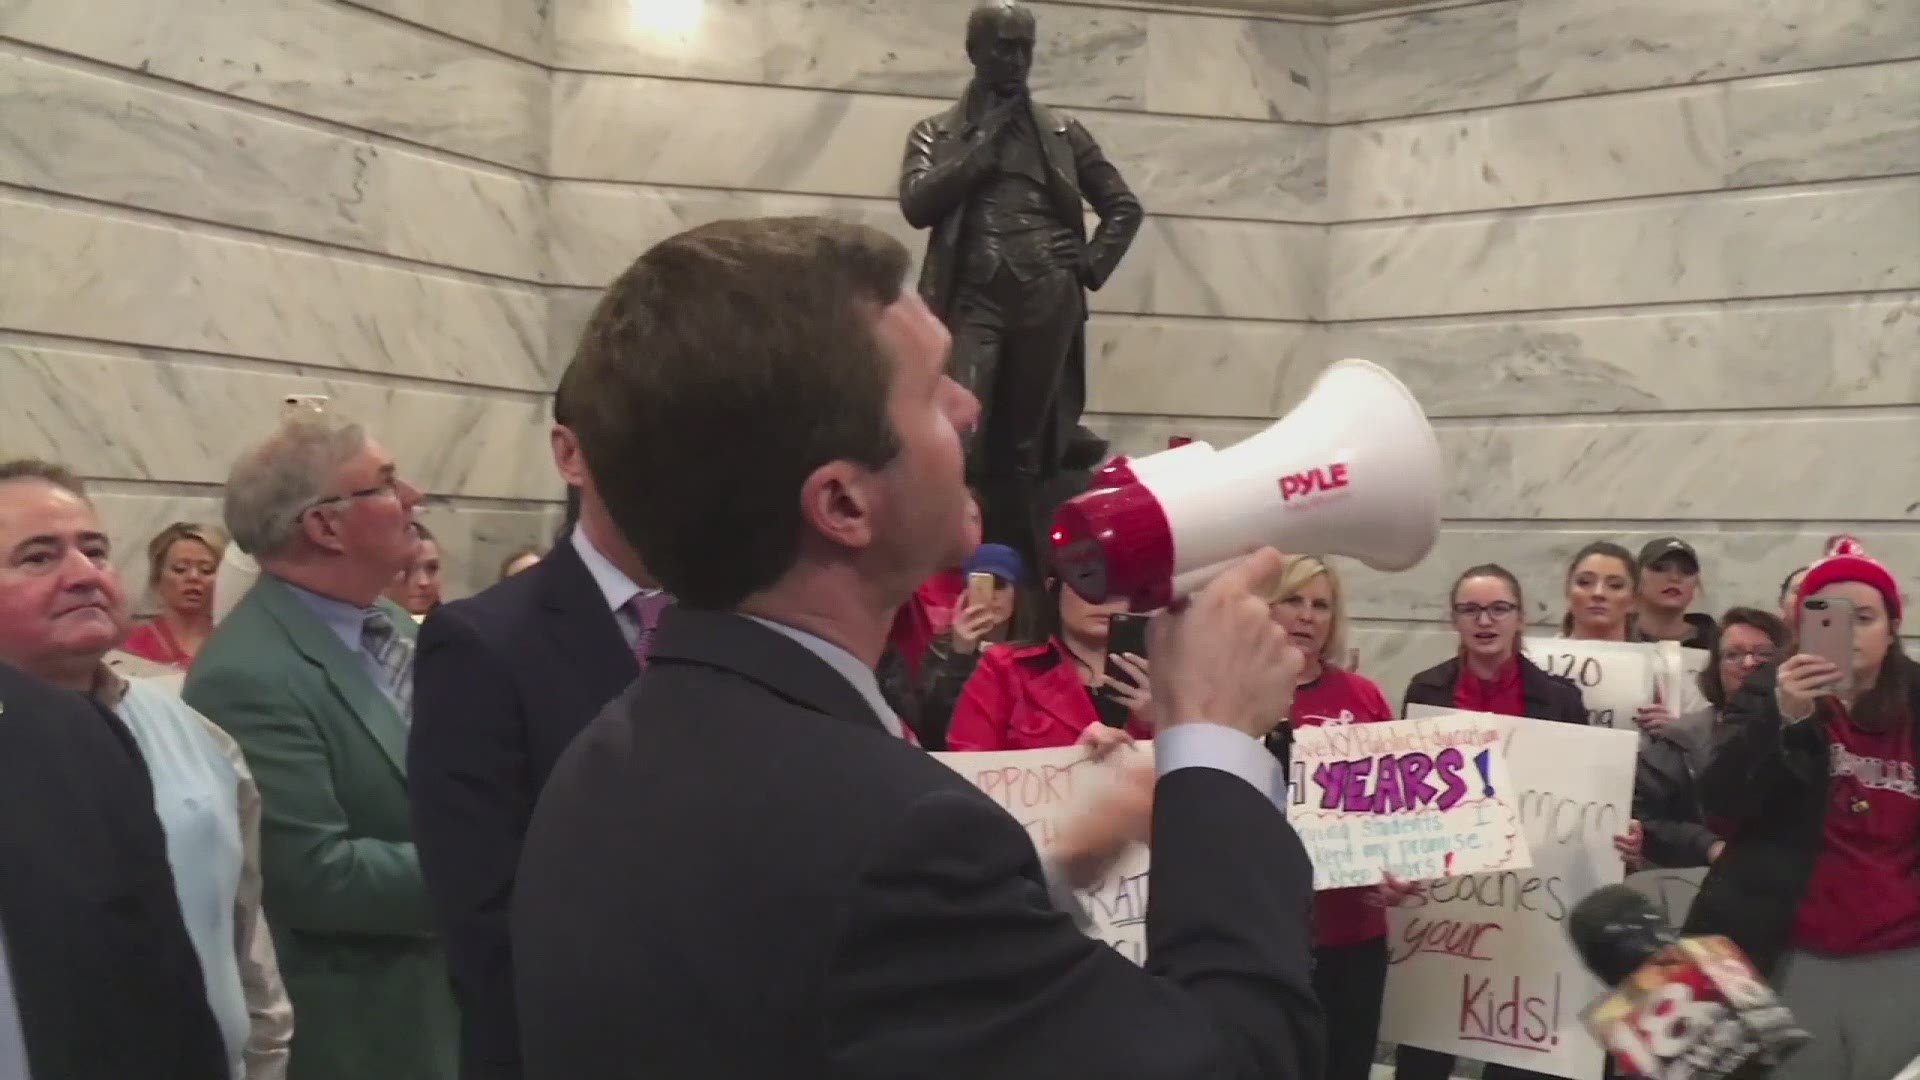 Hundreds of Kentucky teachers called in sick on Friday to protest last-minute changes to their pension system, forcing nearly two dozen districts to close while educators rallied outside of the governor's office to demand he not sign the bill. (March 30)